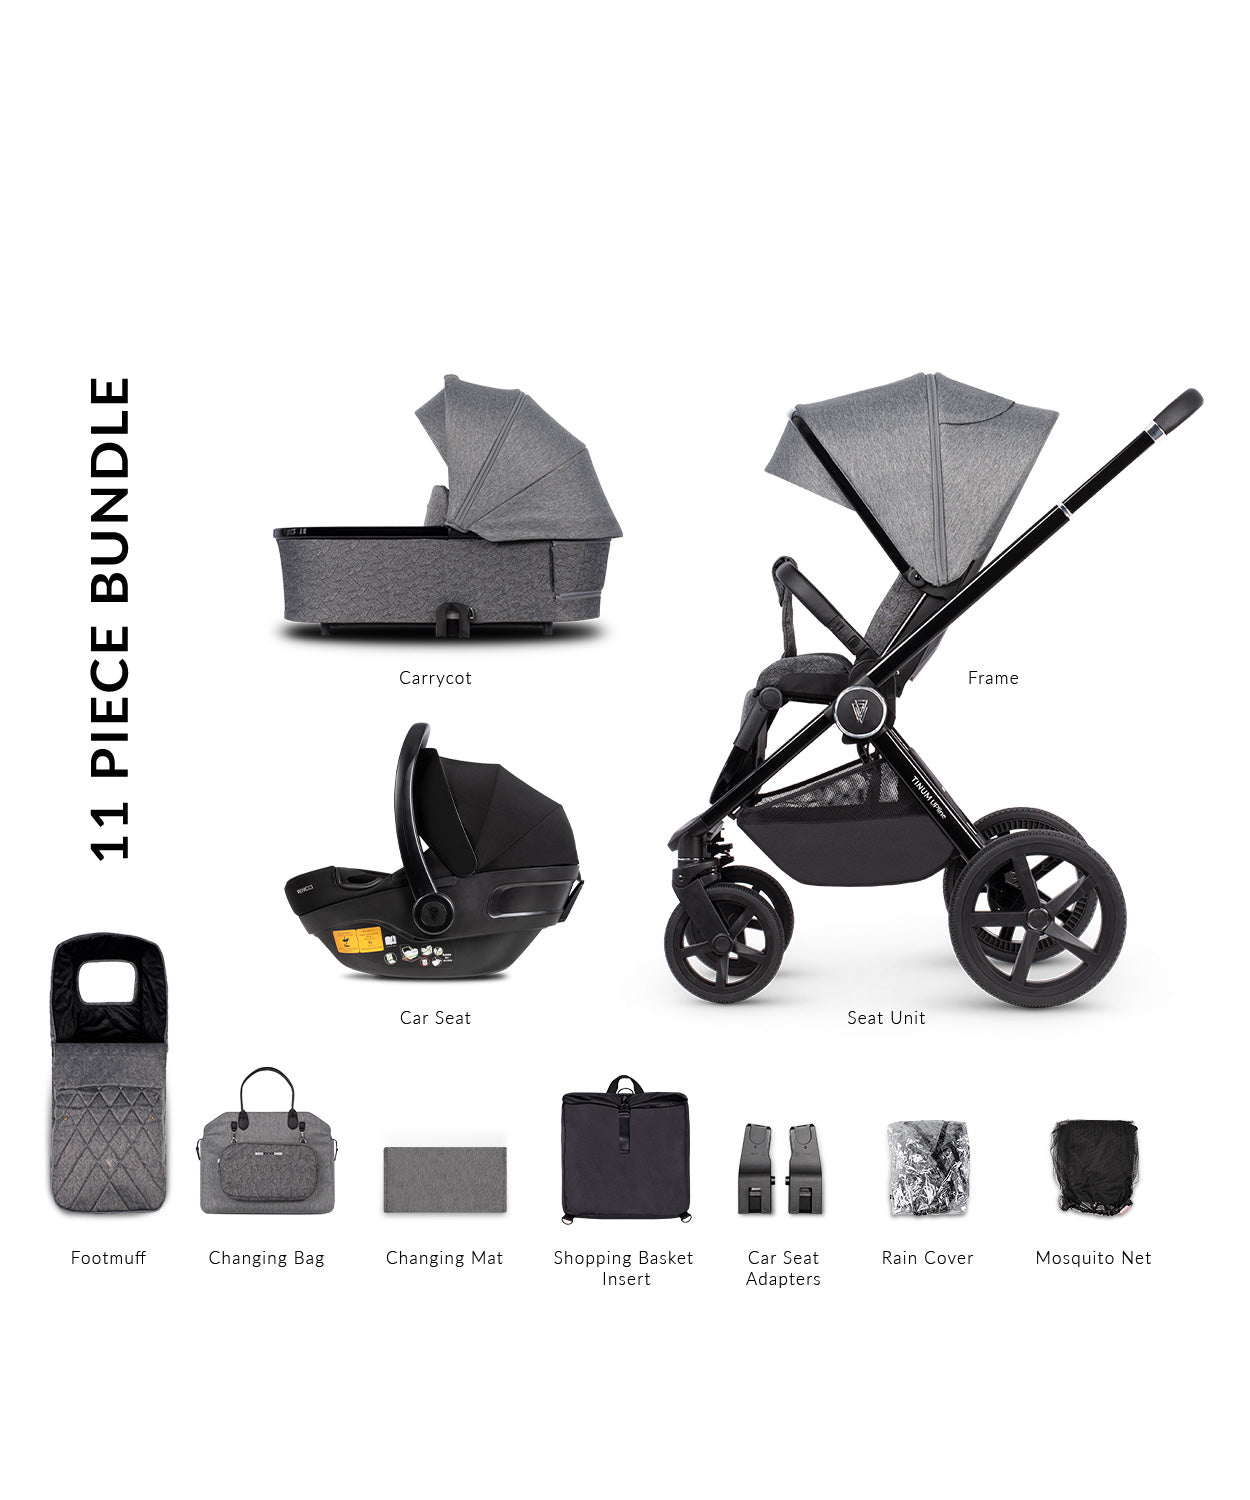 Venicci Tinum Upline 3 In 1 Travel System - Slate Grey - For Your Little One